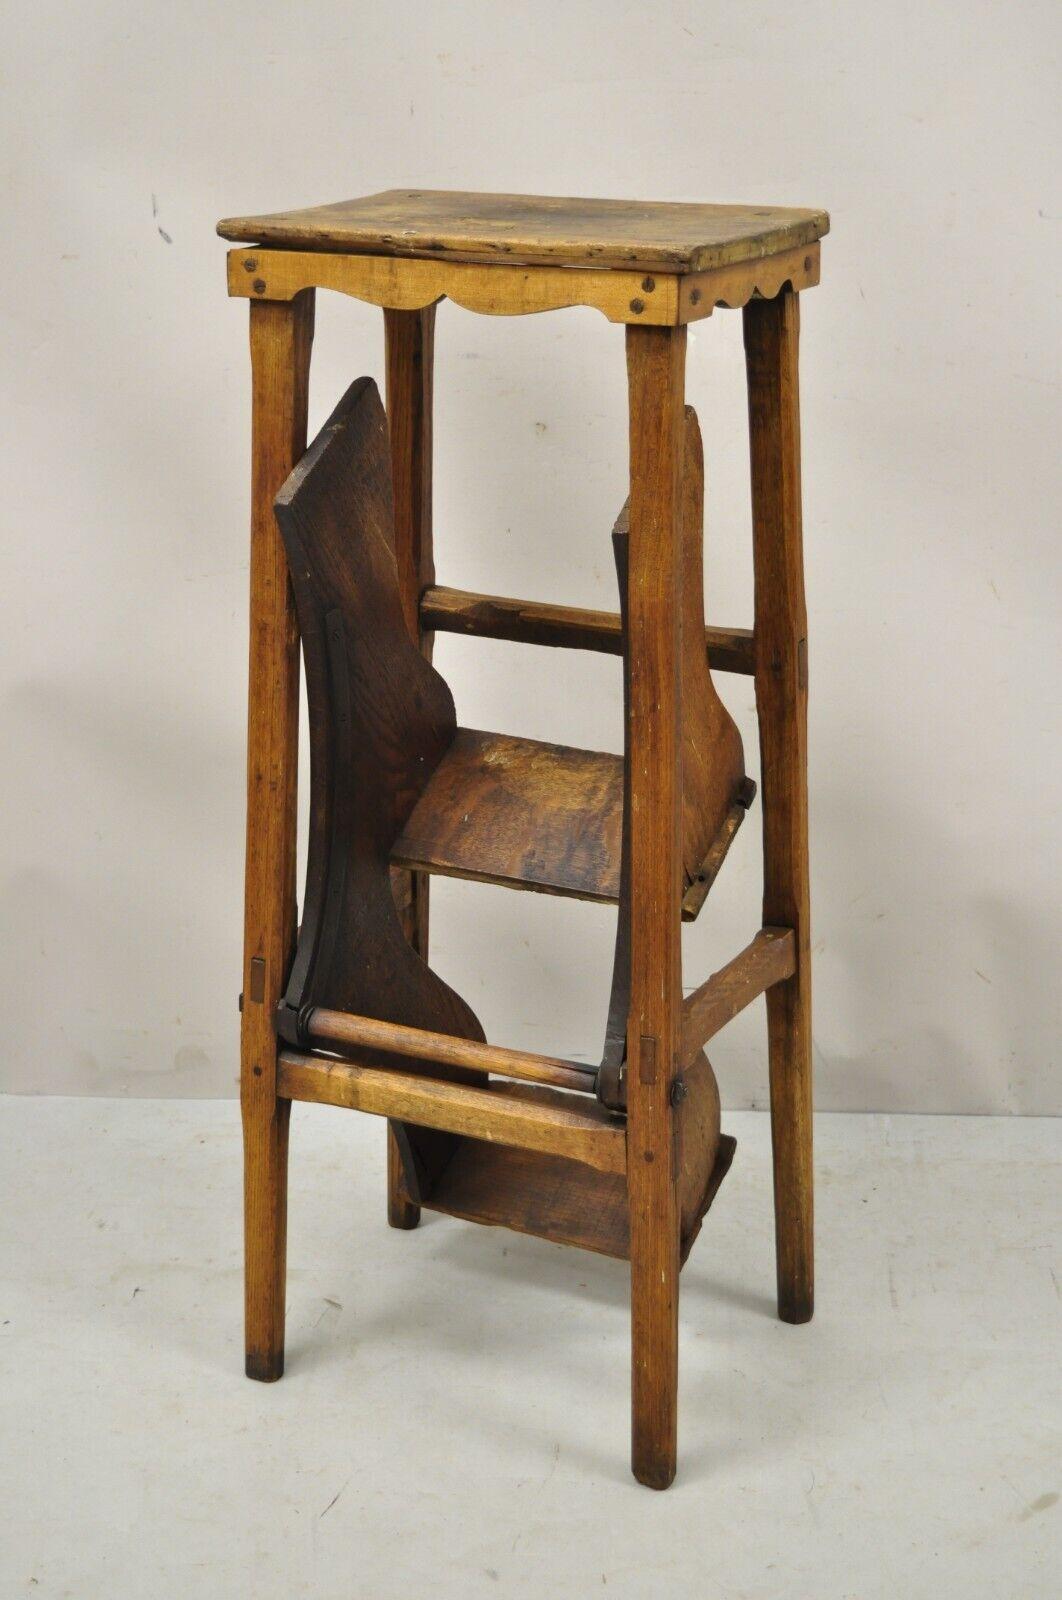 Antique French Provincial country oak wood folding library step ladder. Item features remarkable patina, fold out steps, exposed joinery, solid wood construction, beautiful wood grain, distressed finish, very nice antique item. Circa 19th Century.